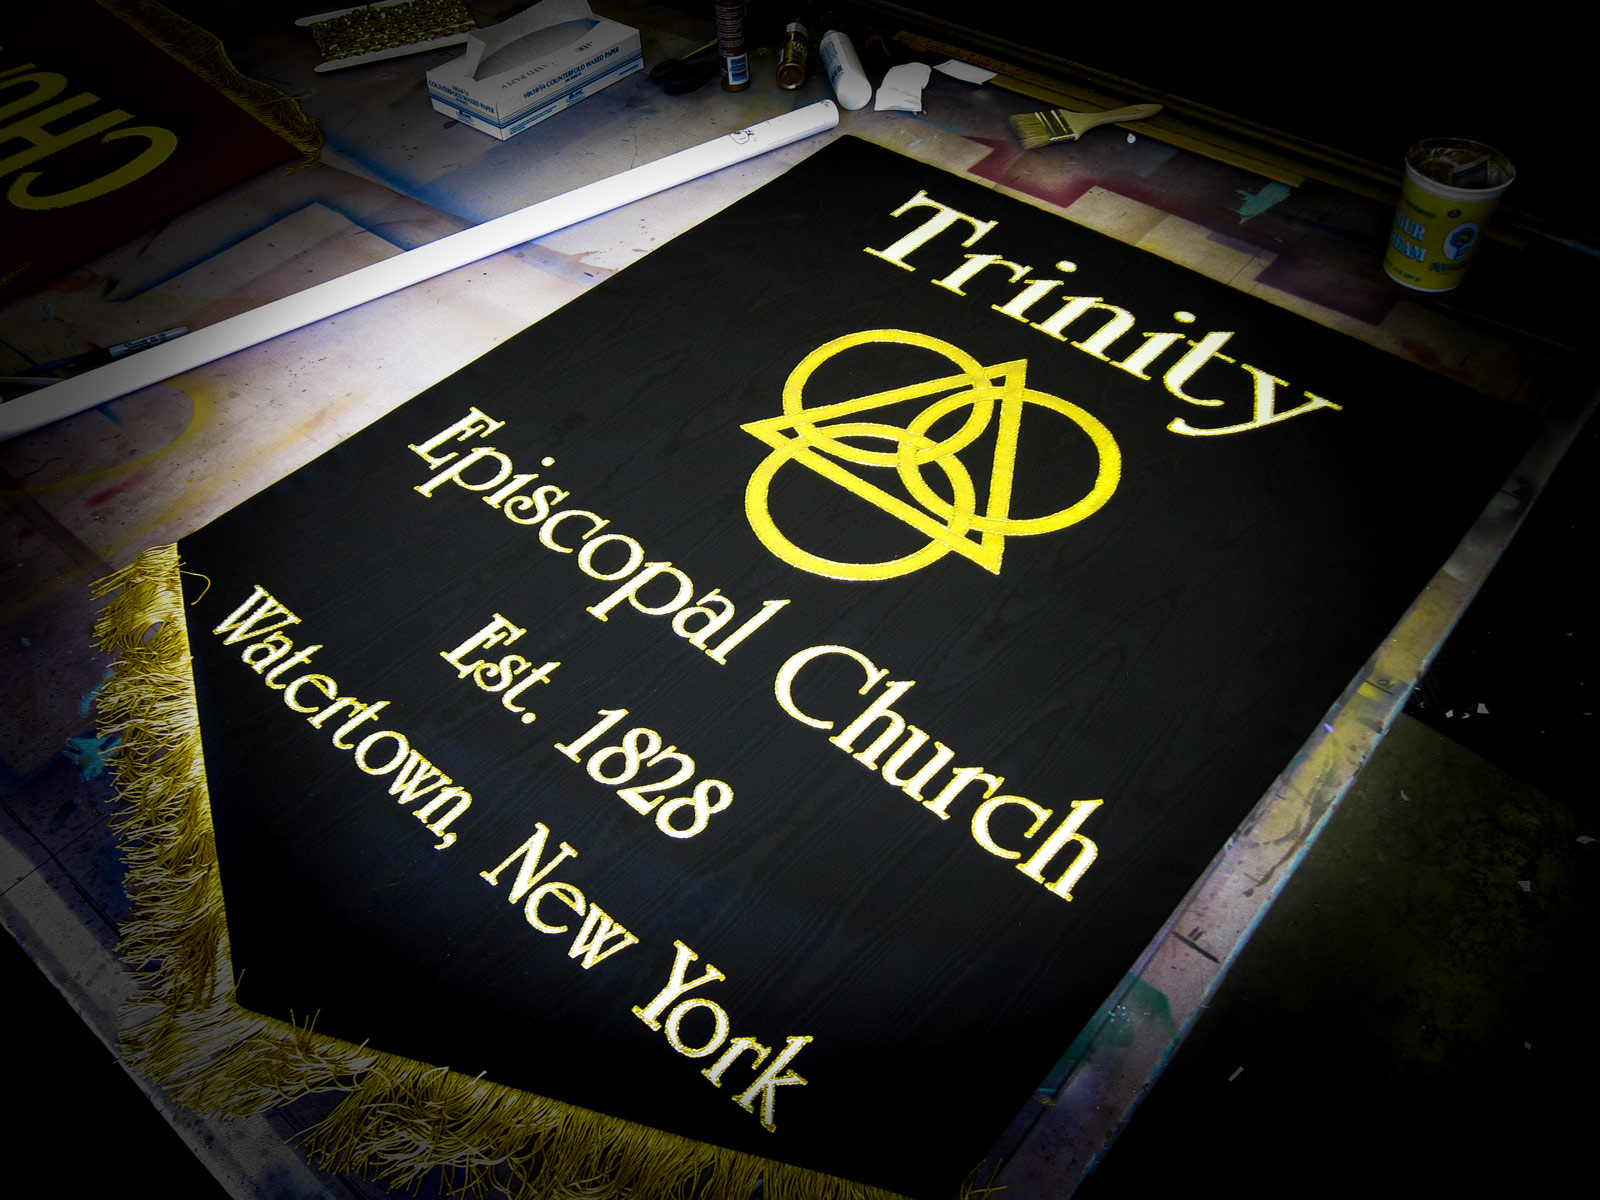 The black background on this church fabric wall banner looks really dazzling